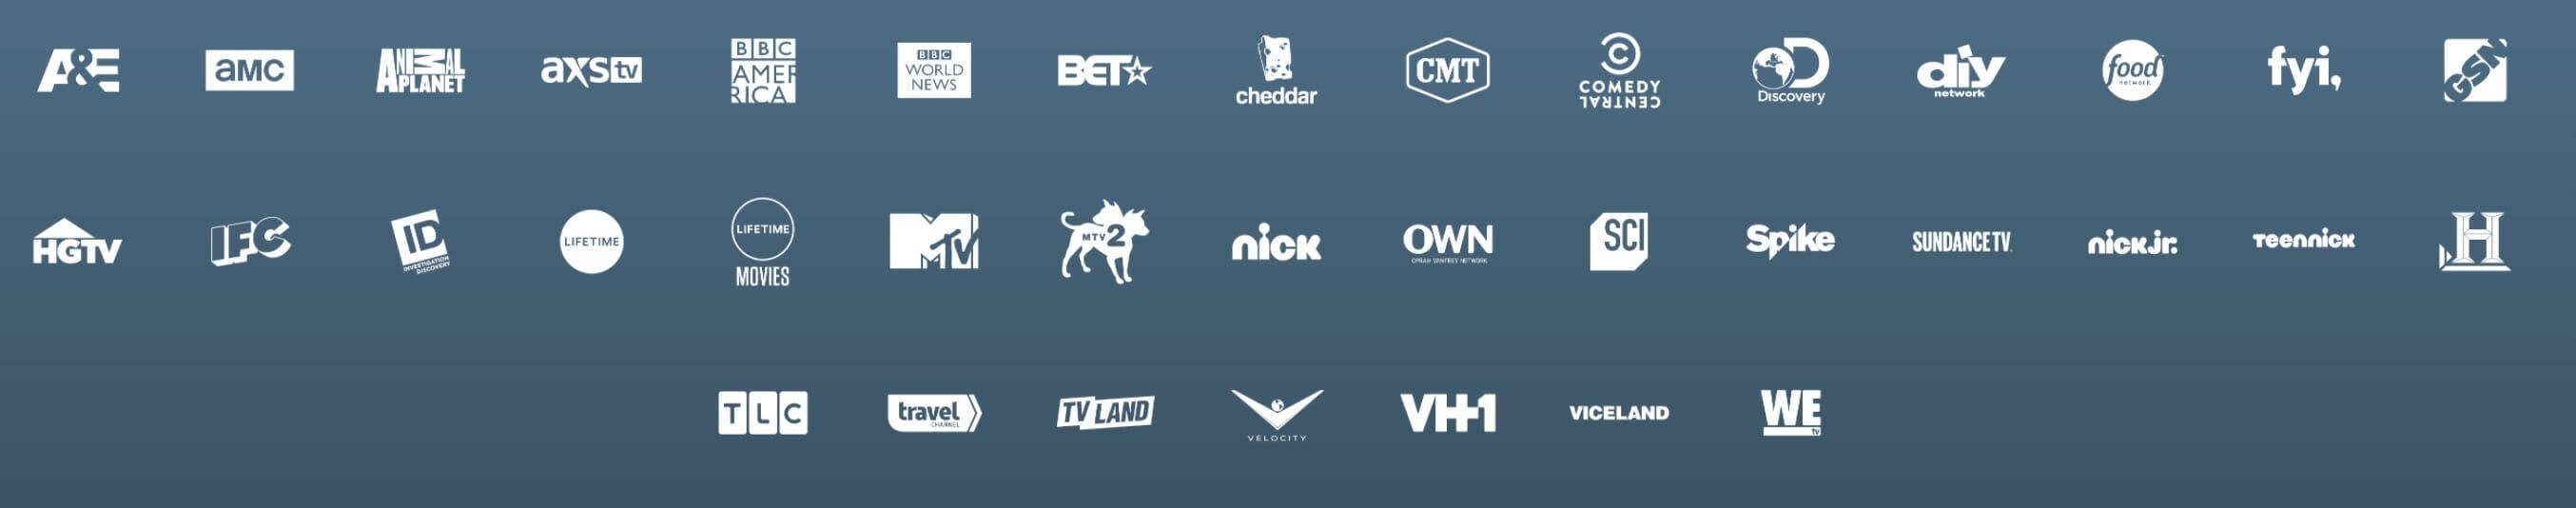 live streaming tv : philo channels